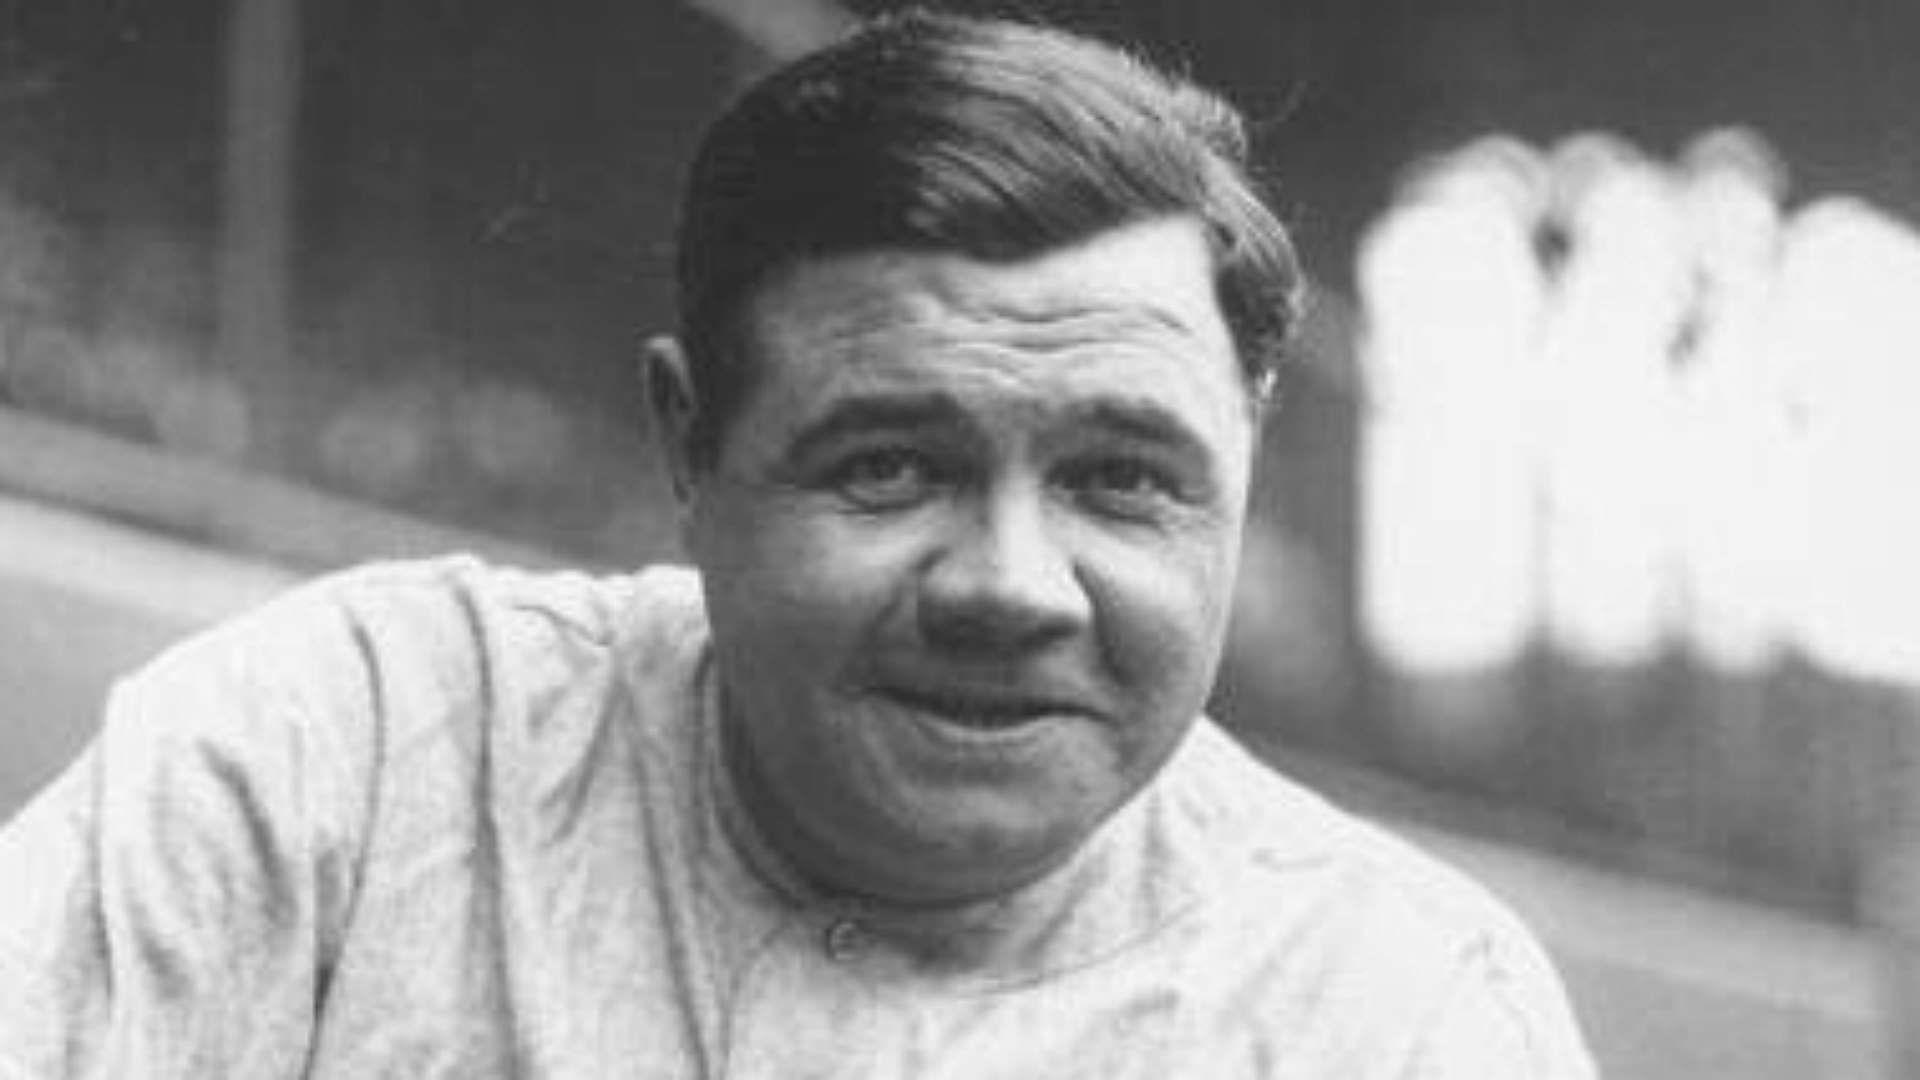 Contract sending Babe Ruth from Red Sox to Yankees up for auction